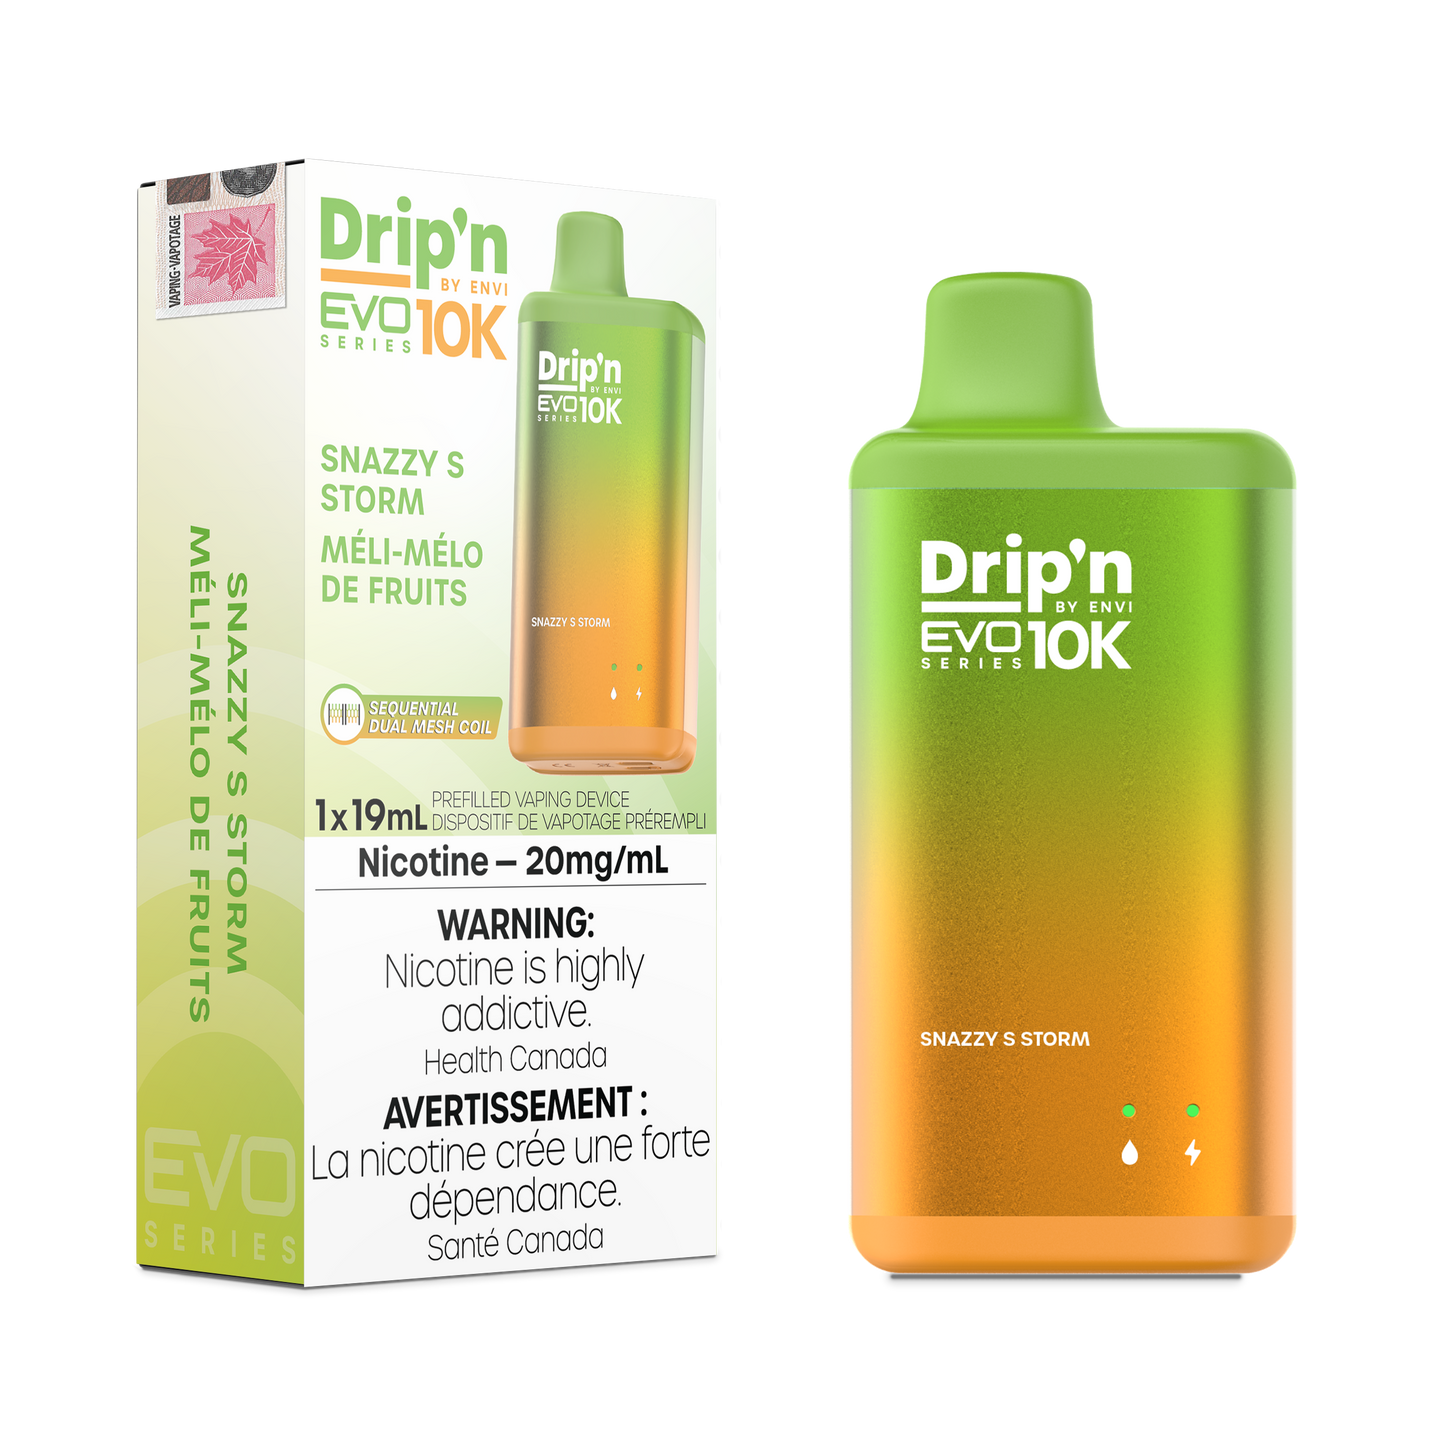 Envi Drip'n EVO 10K Snazzy S Storm Disposable Vape - Online Vape Shop Canada - Quebec and BC Shipping Available